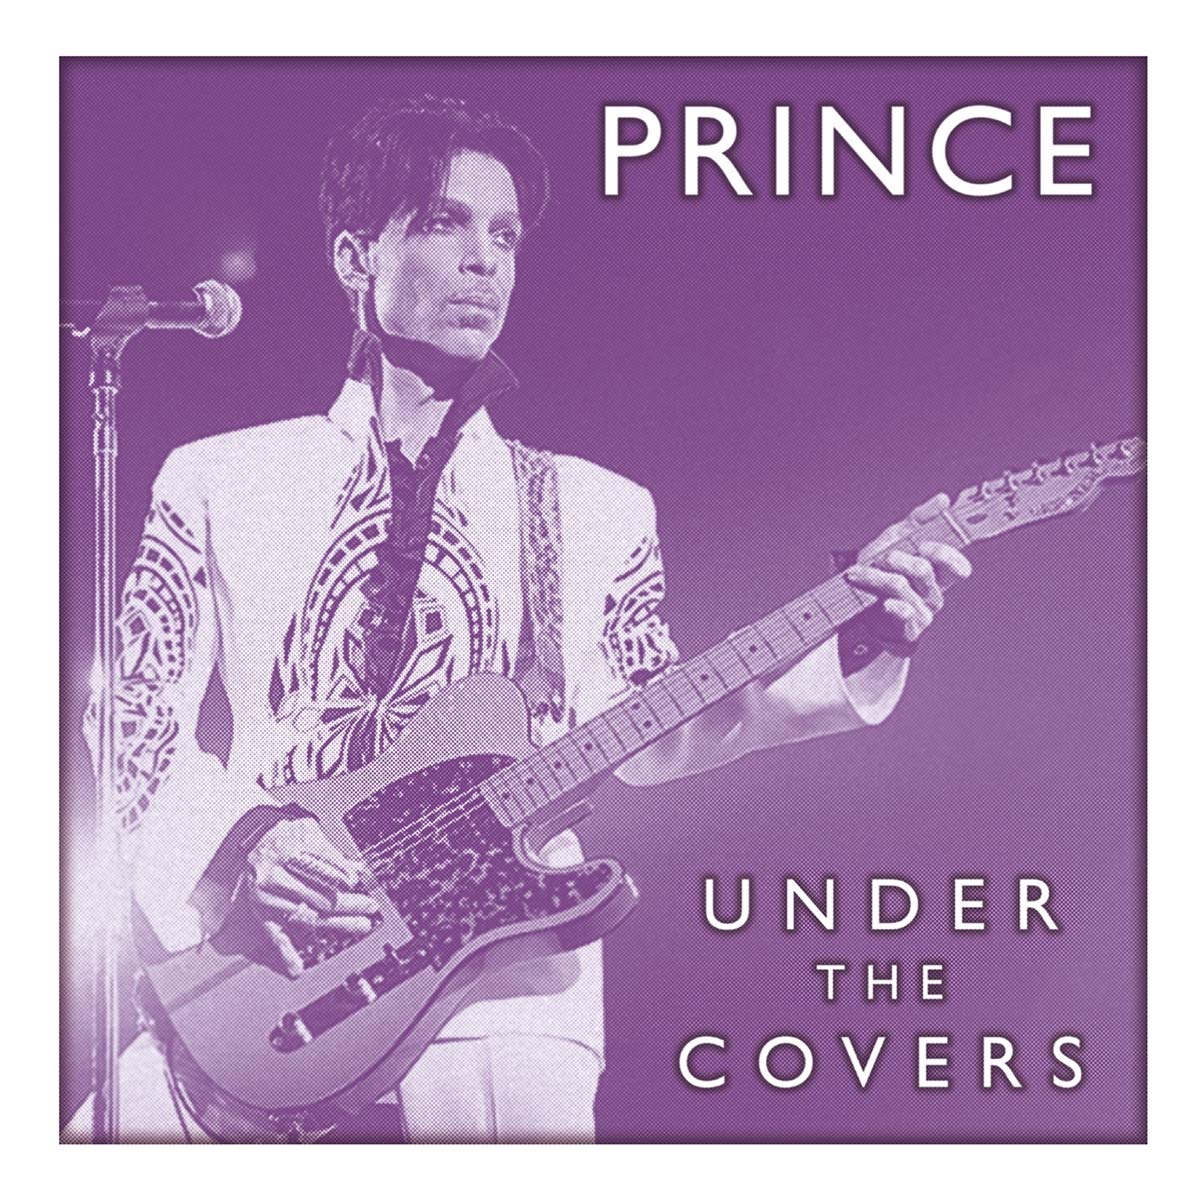 PRINCE – Under The Covers